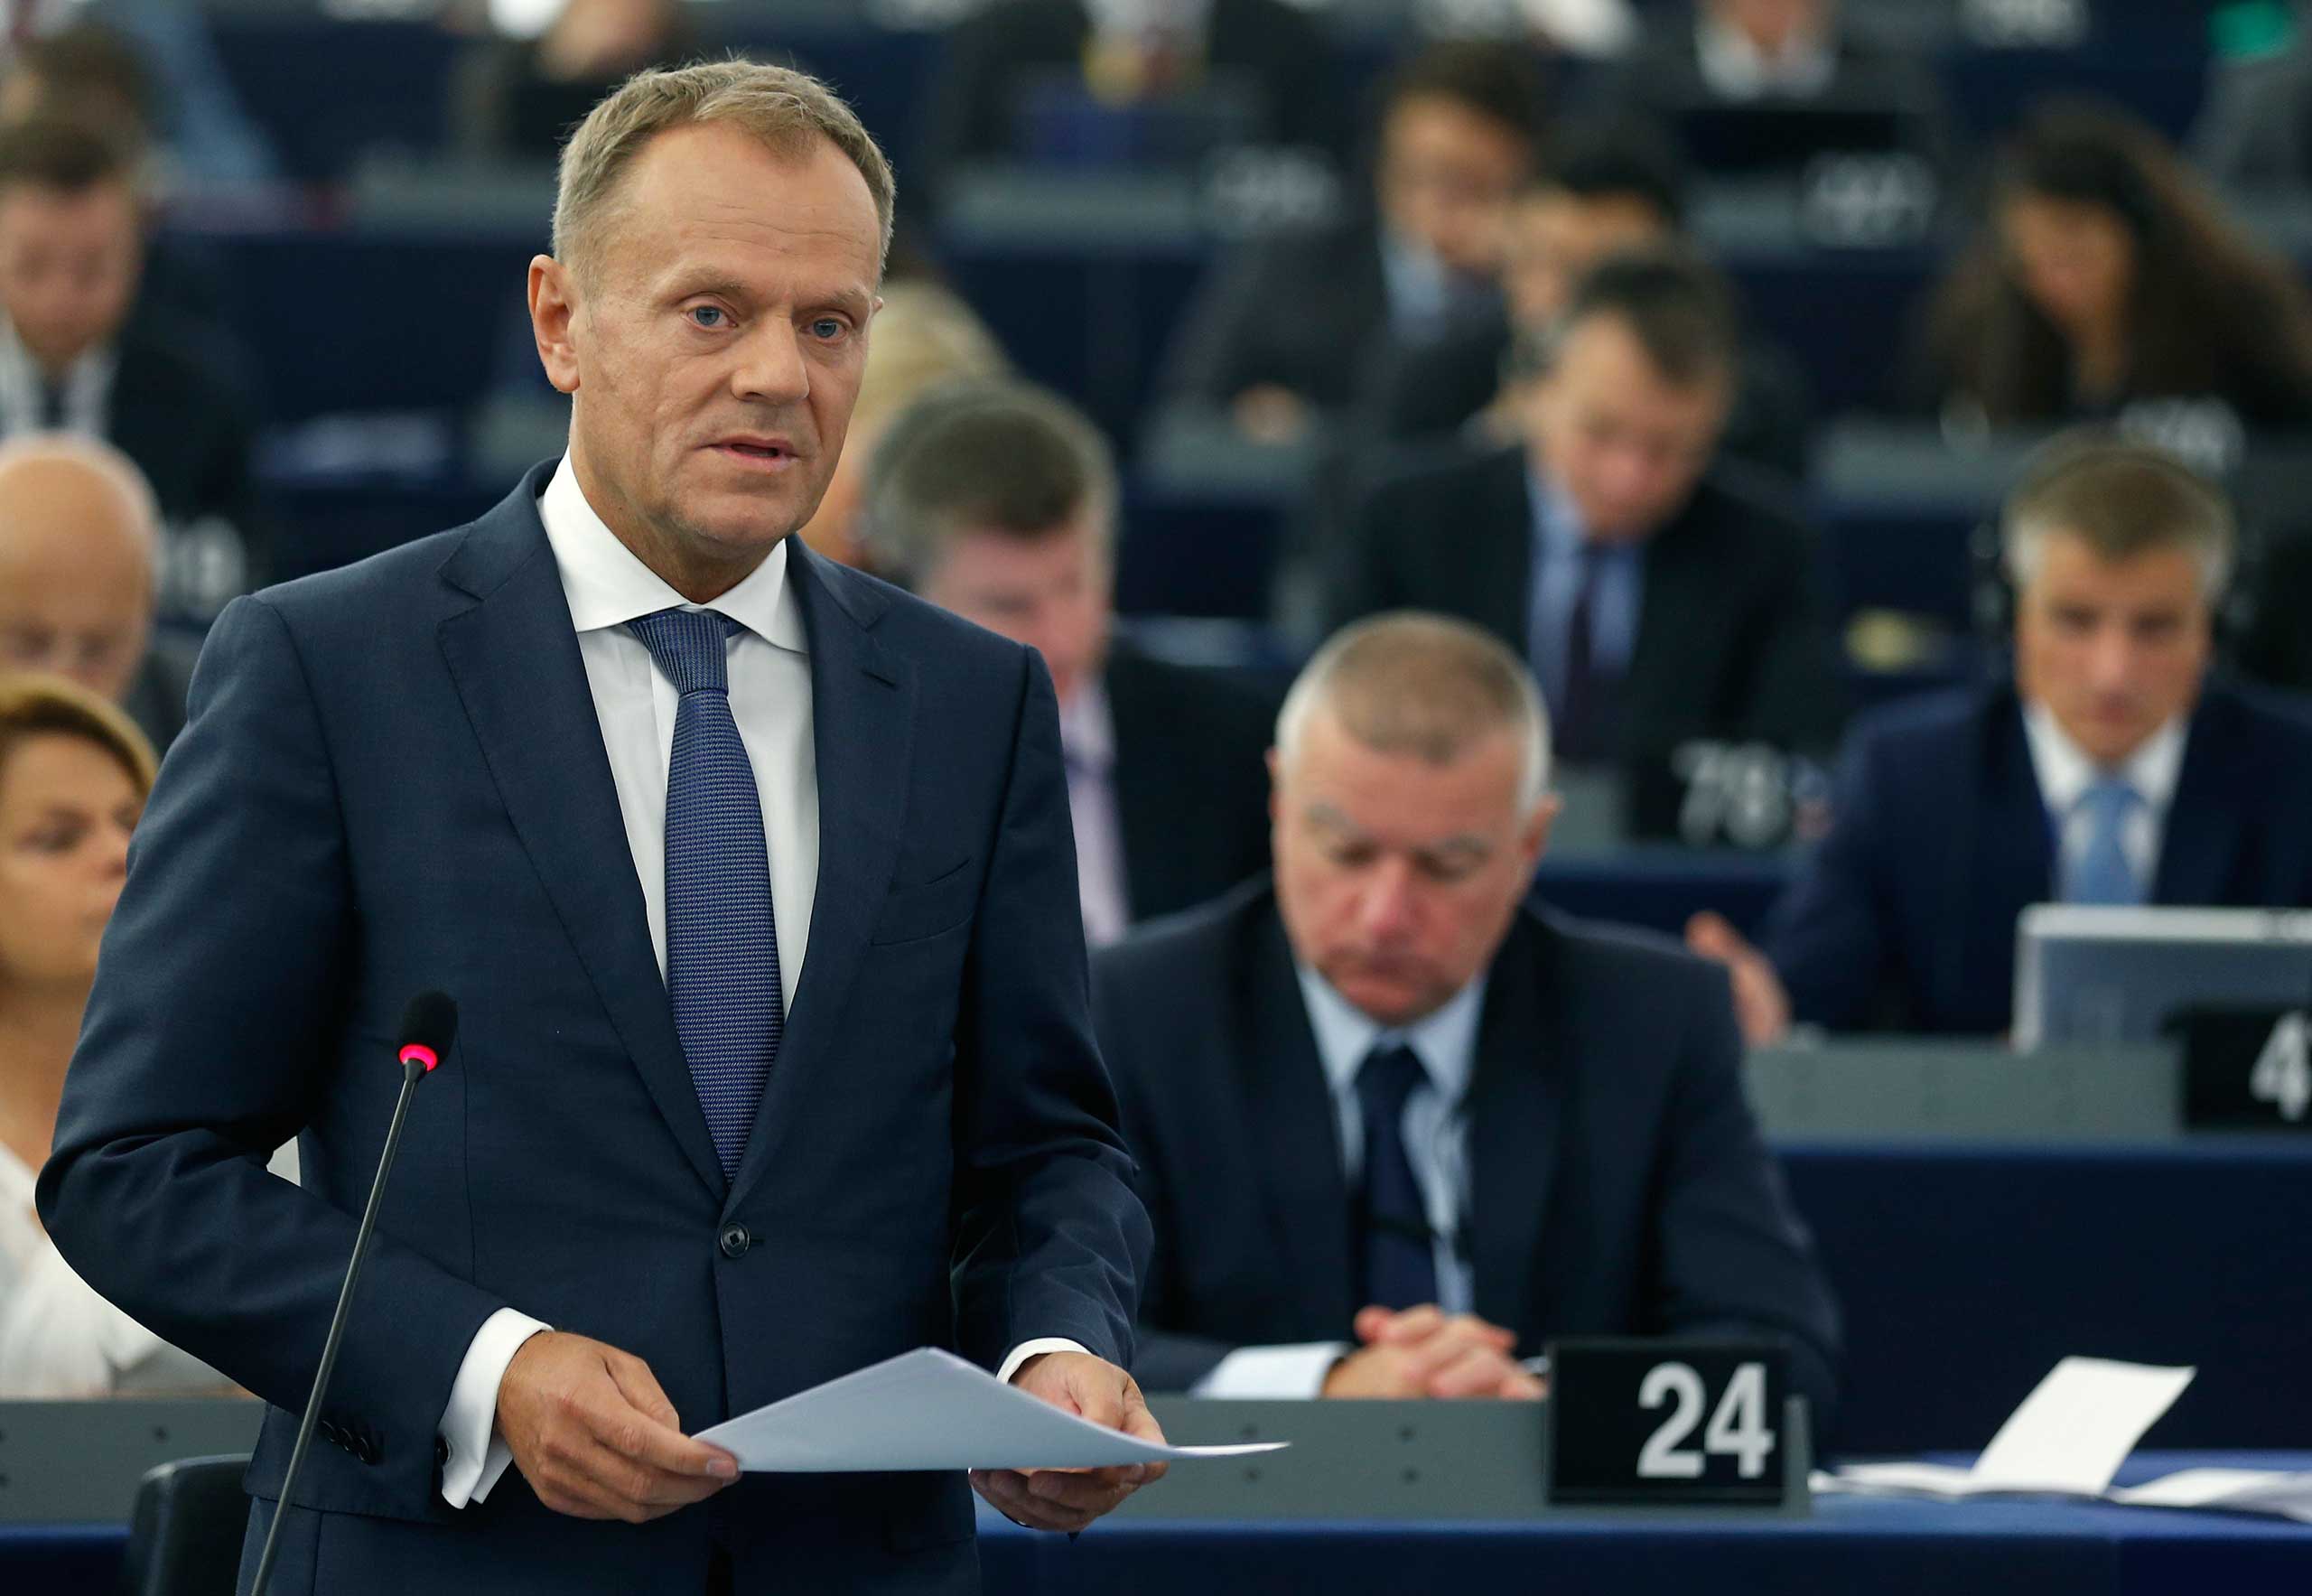 European Council President Tusk addresses the European Parliament during a debate on the results of the last informal European Council, in Strasbourg